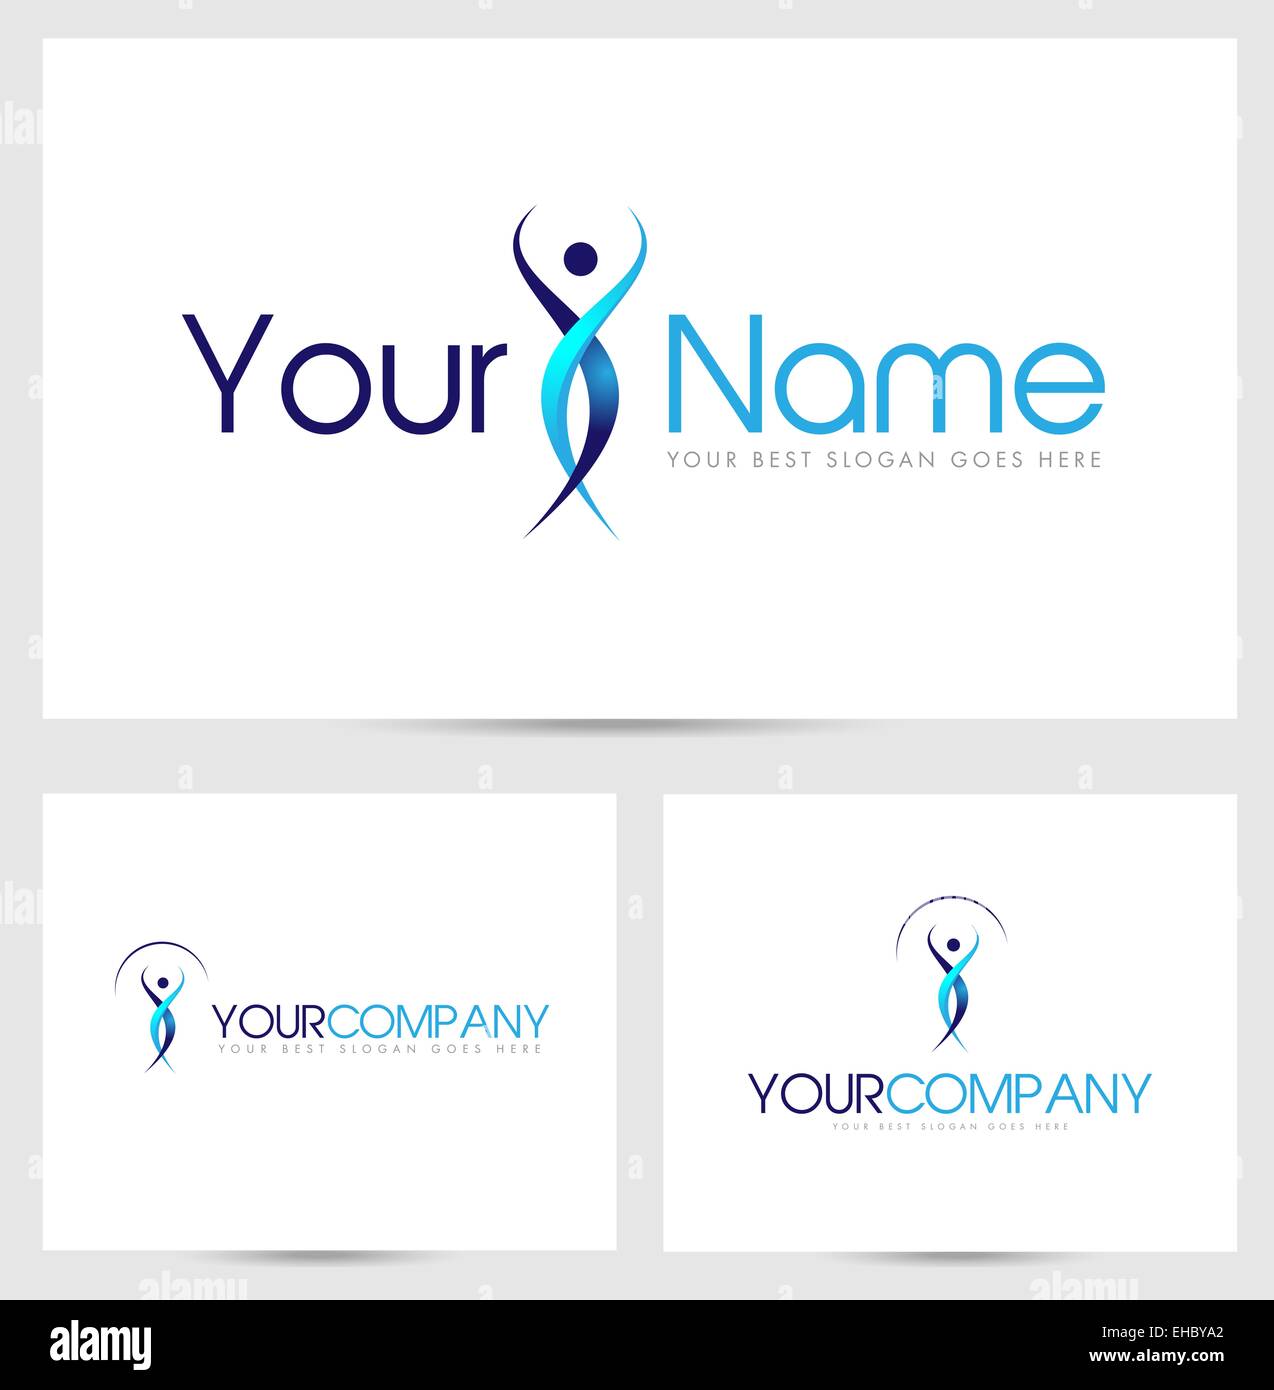 Silhouette Logo. Creative abstract silhouette of a man and company name text. Stock Photo